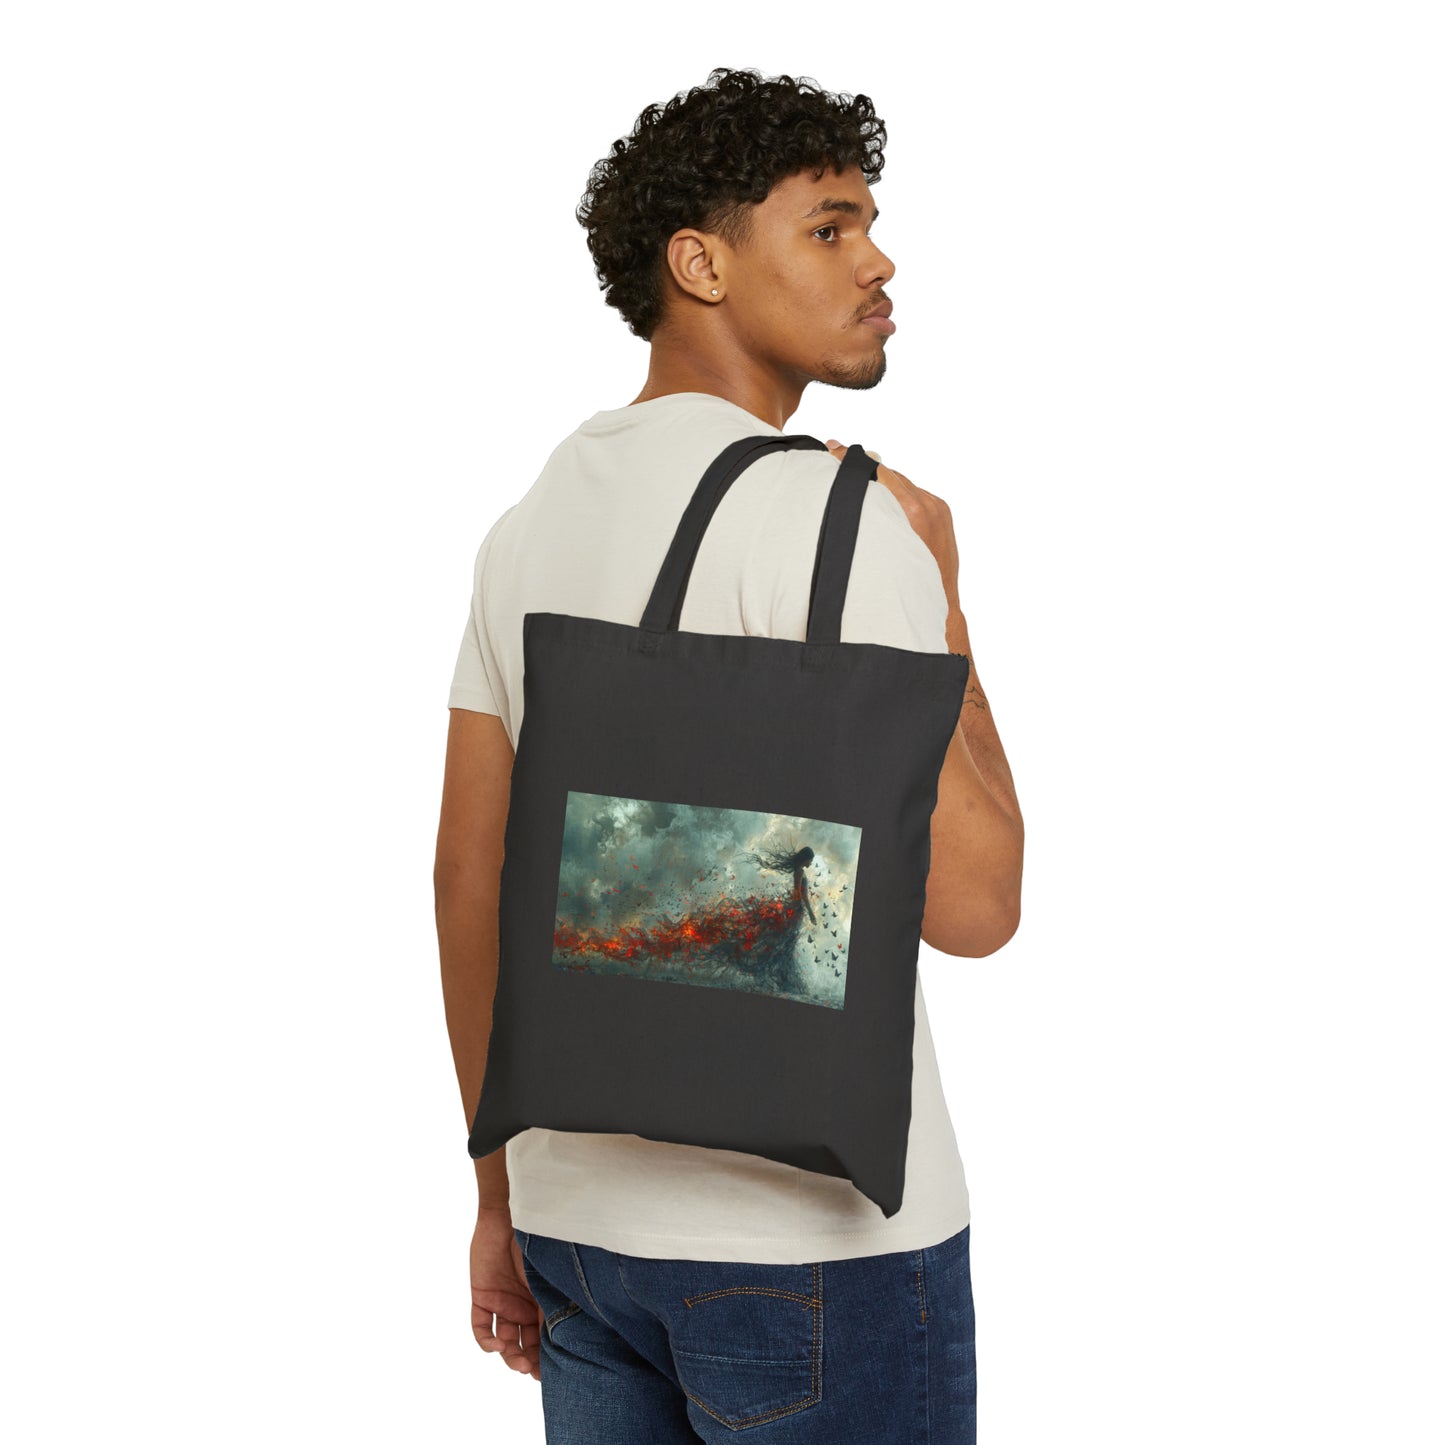 Cotton Canvas Tote Bag: Lady Dissociated